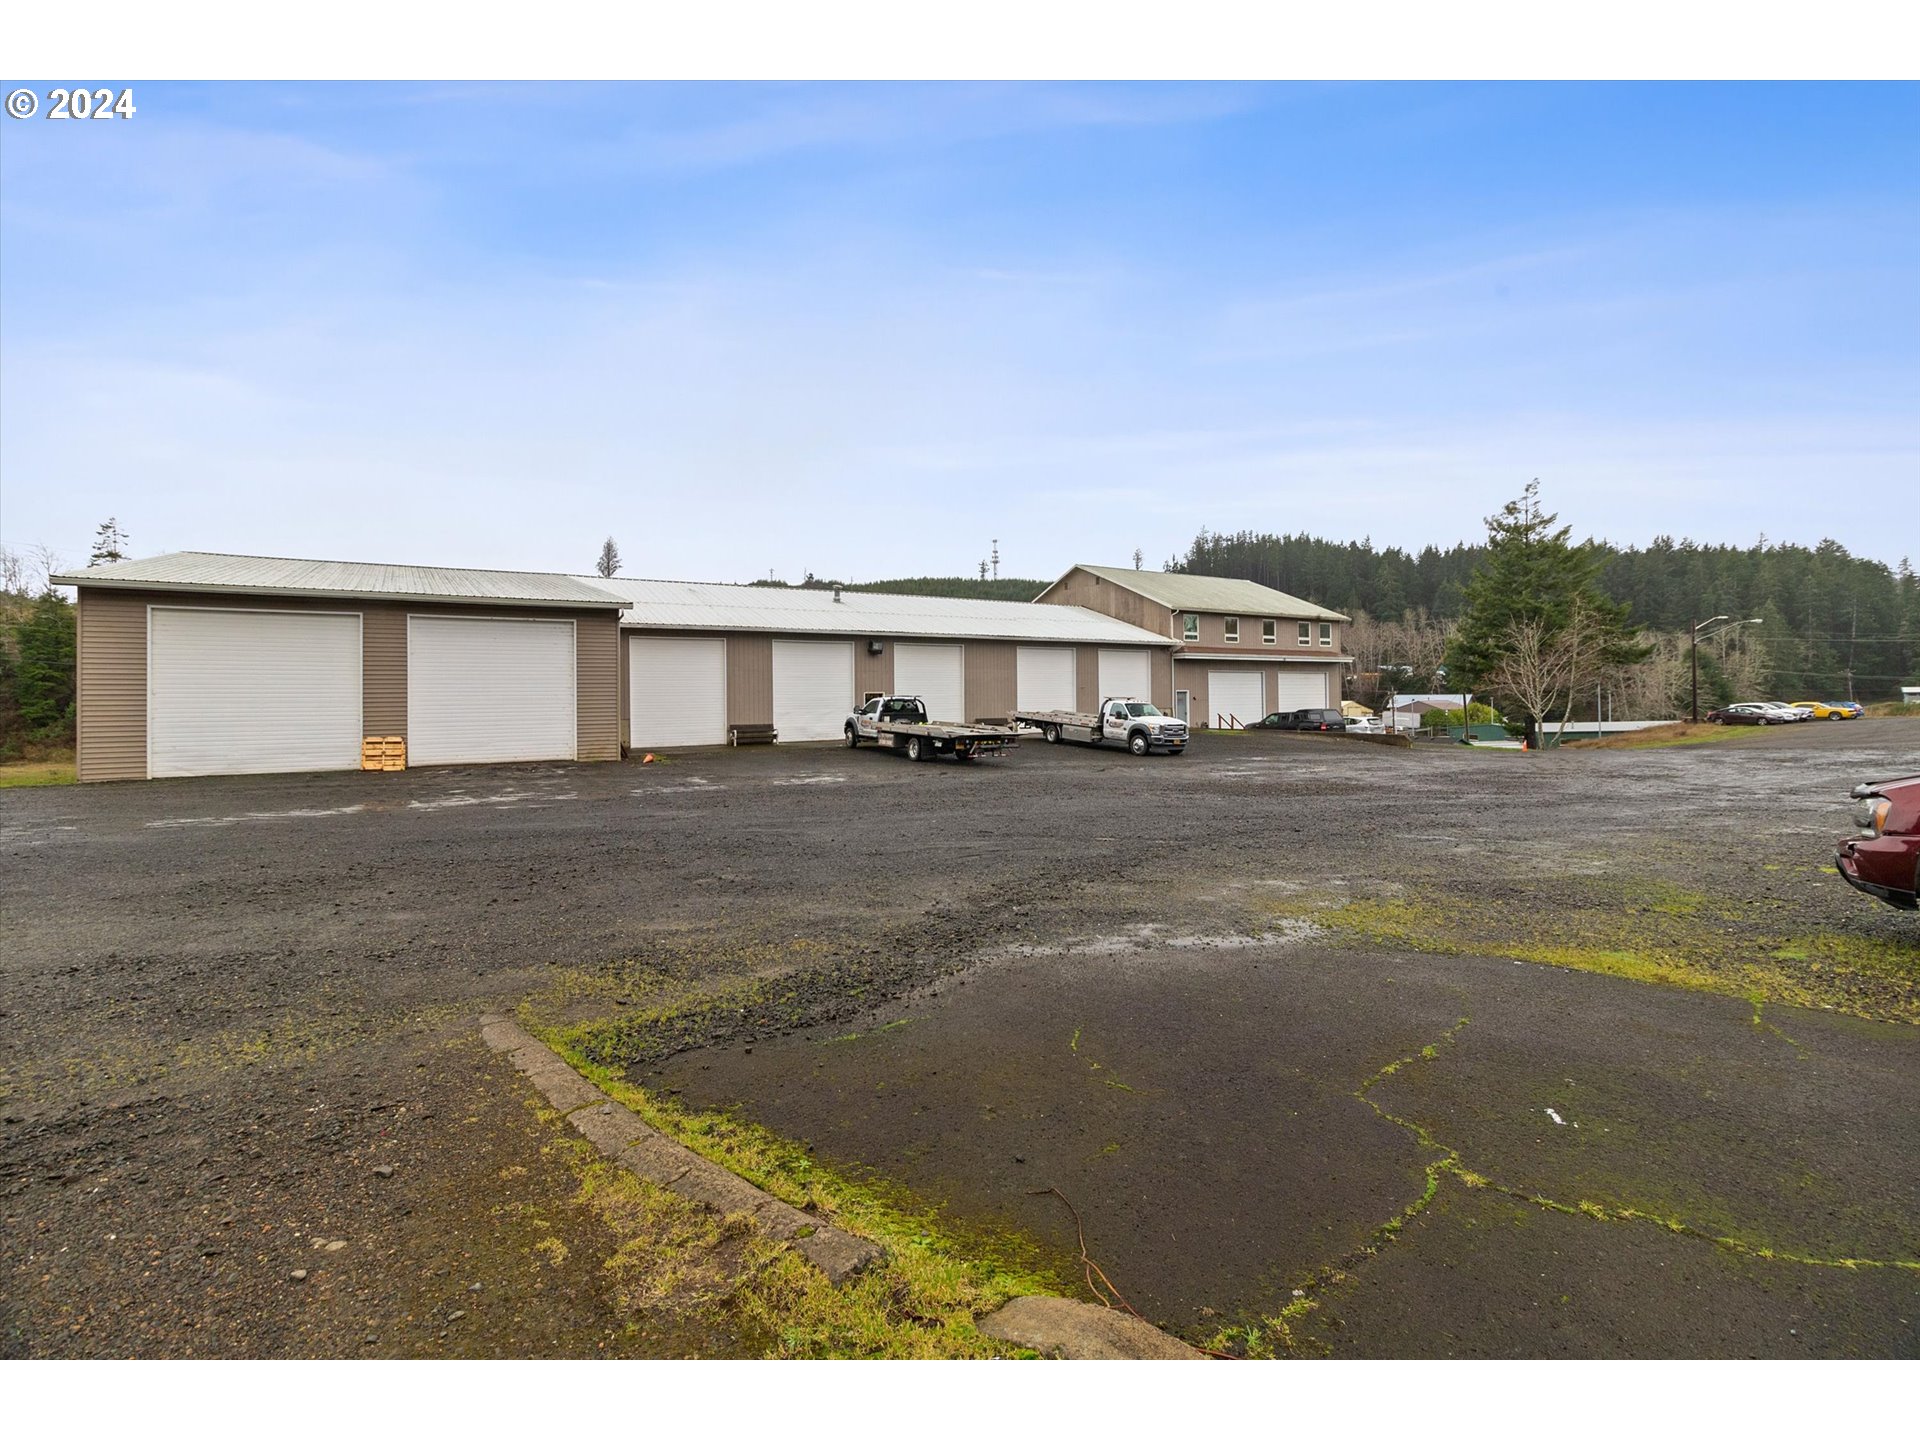 2795 SE 23RD DR, Lincoln City, OR 